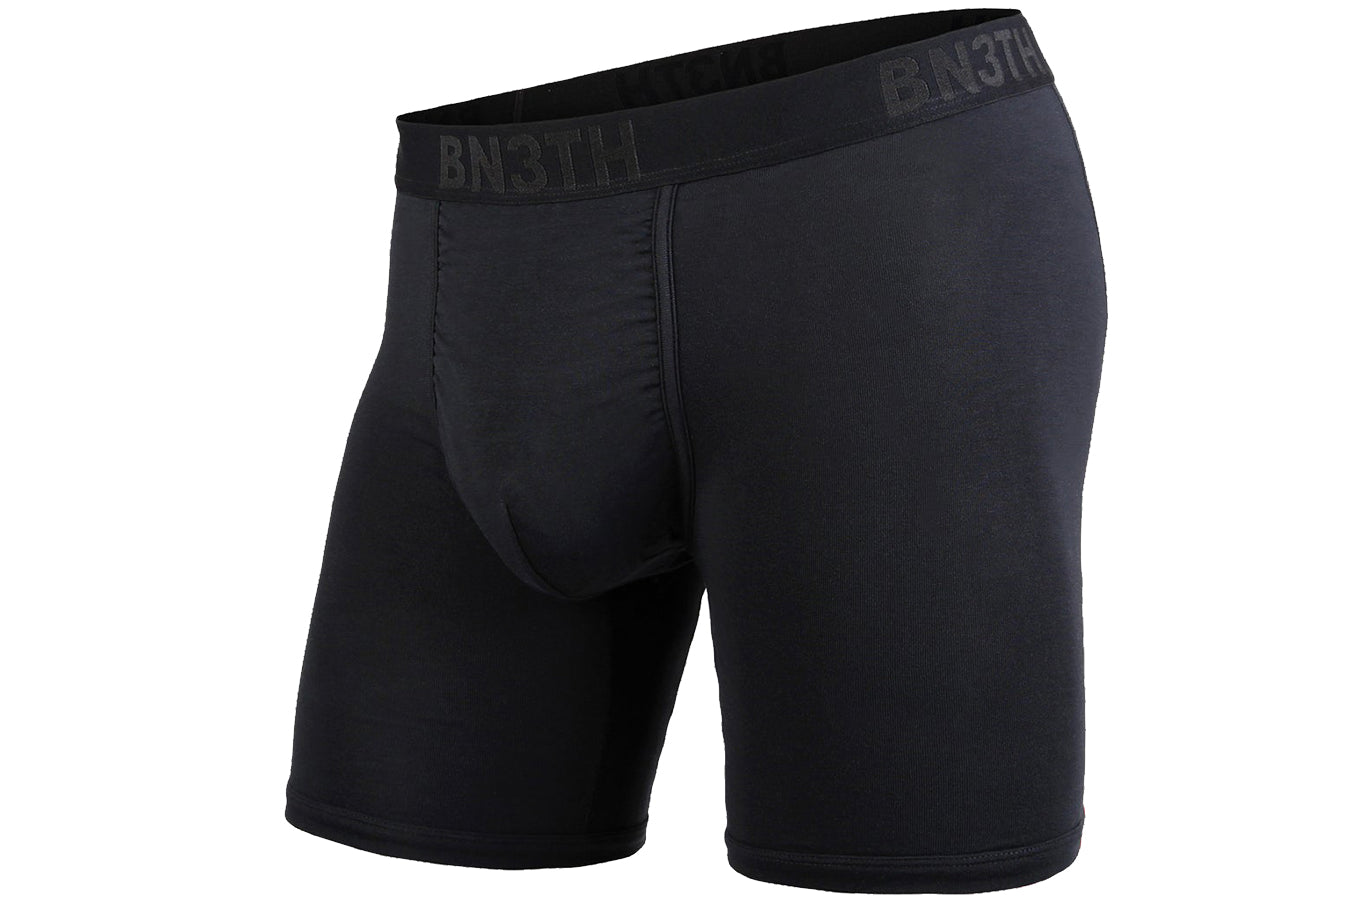 Outset Boxer Brief: Naval/Cassette Madness Cedar 2 Pack